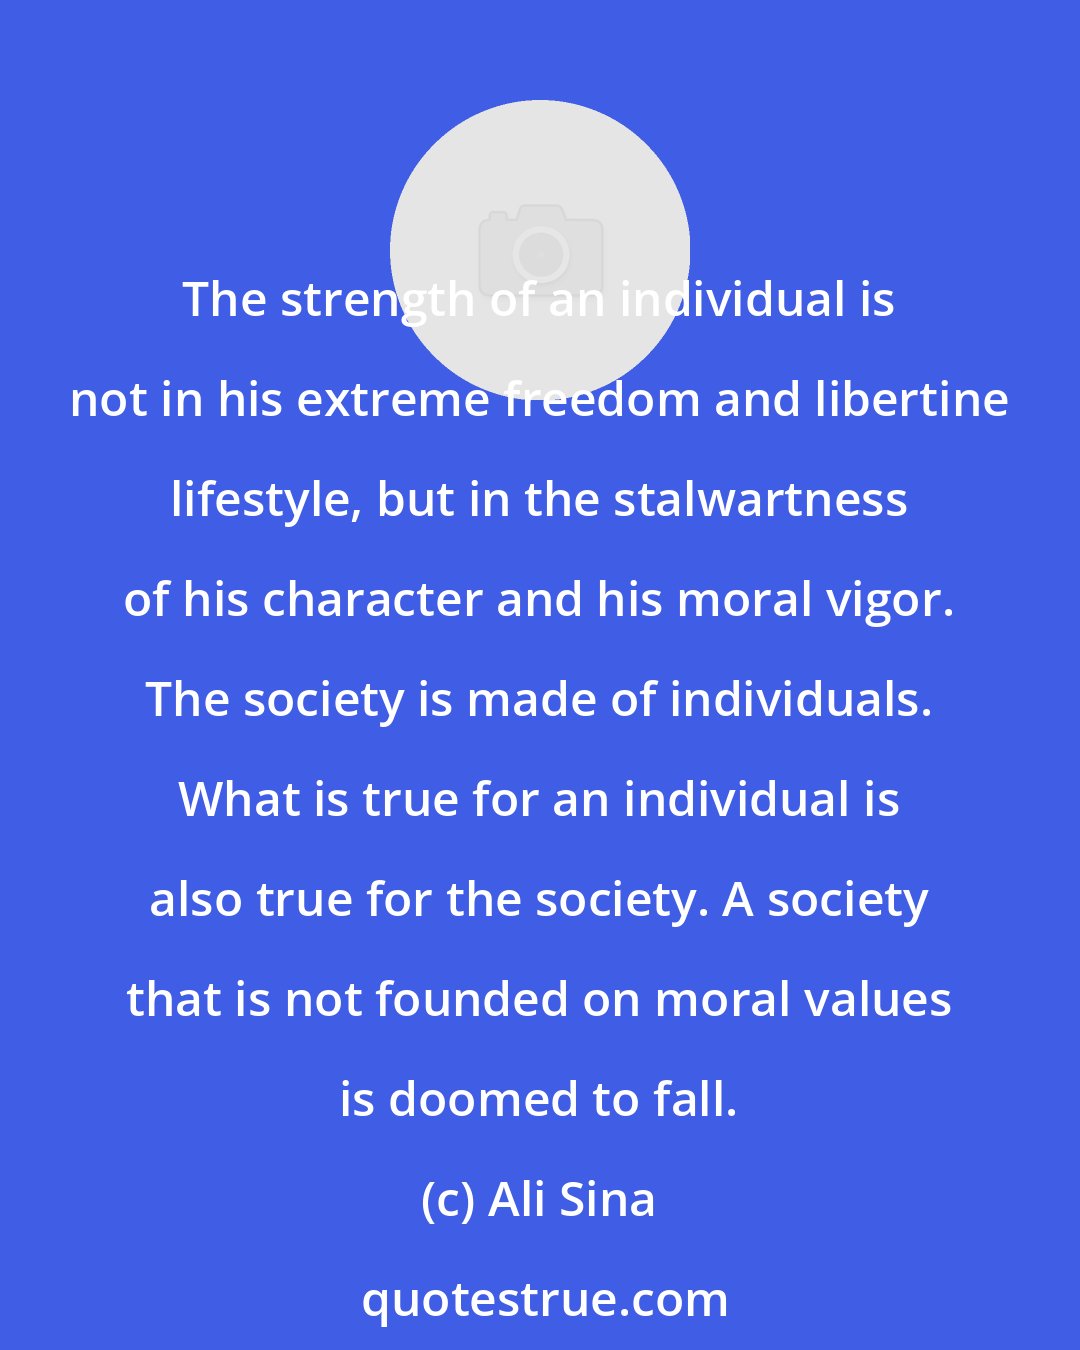 Ali Sina: The strength of an individual is not in his extreme freedom and libertine lifestyle, but in the stalwartness of his character and his moral vigor. The society is made of individuals. What is true for an individual is also true for the society. A society that is not founded on moral values is doomed to fall.